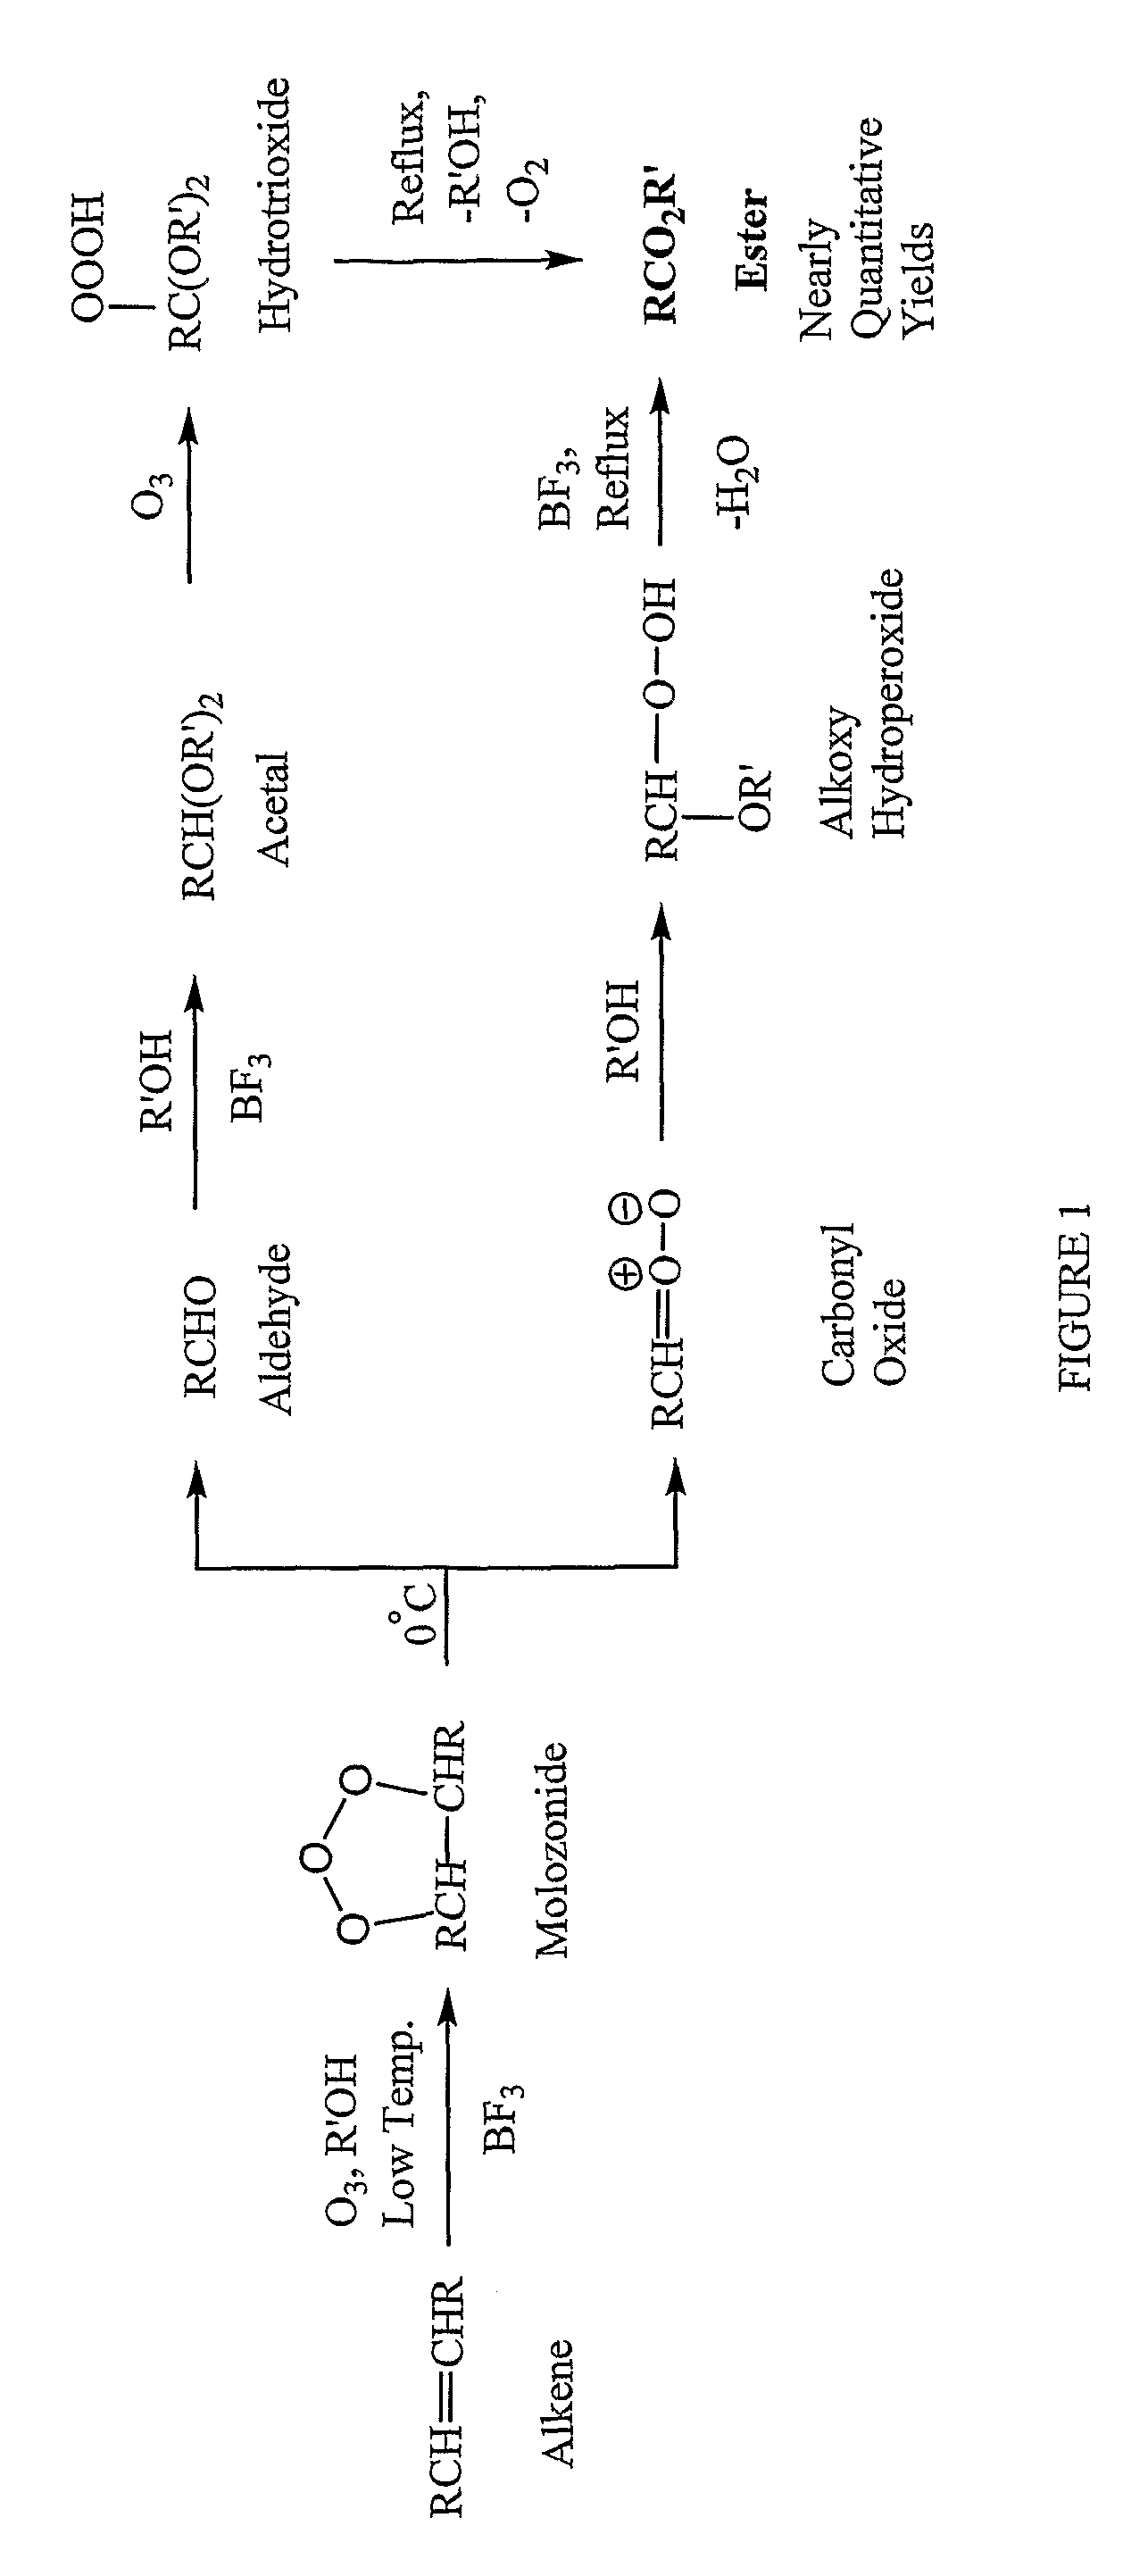 Methods for production of polyols from oils and their use in the production of polyesters and polyurethanes